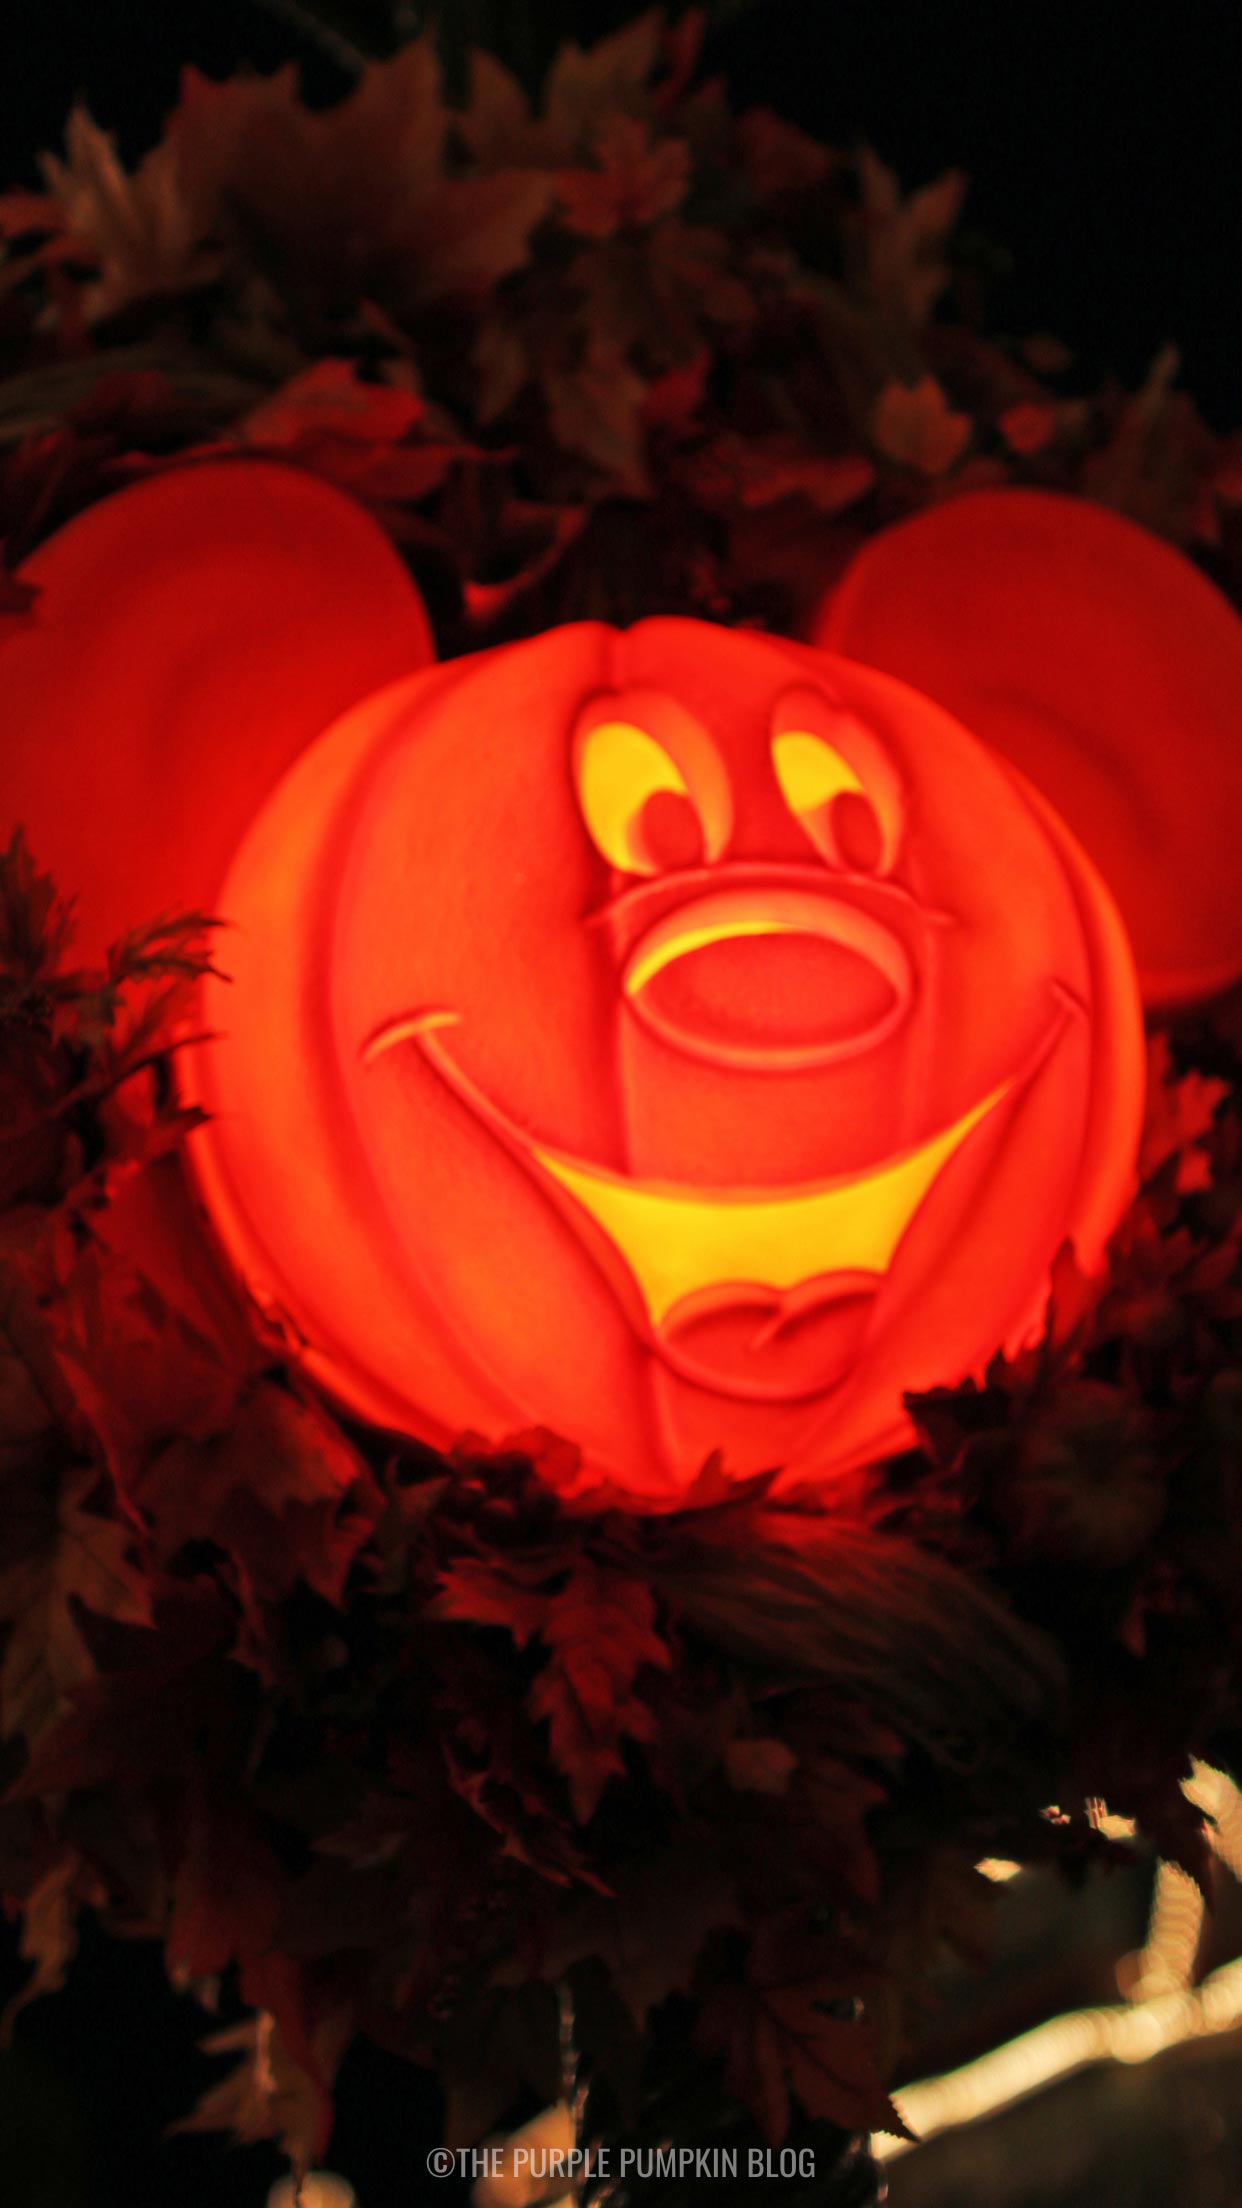 Awesome Disney World Halloween iPhone Wallpaper to Download!